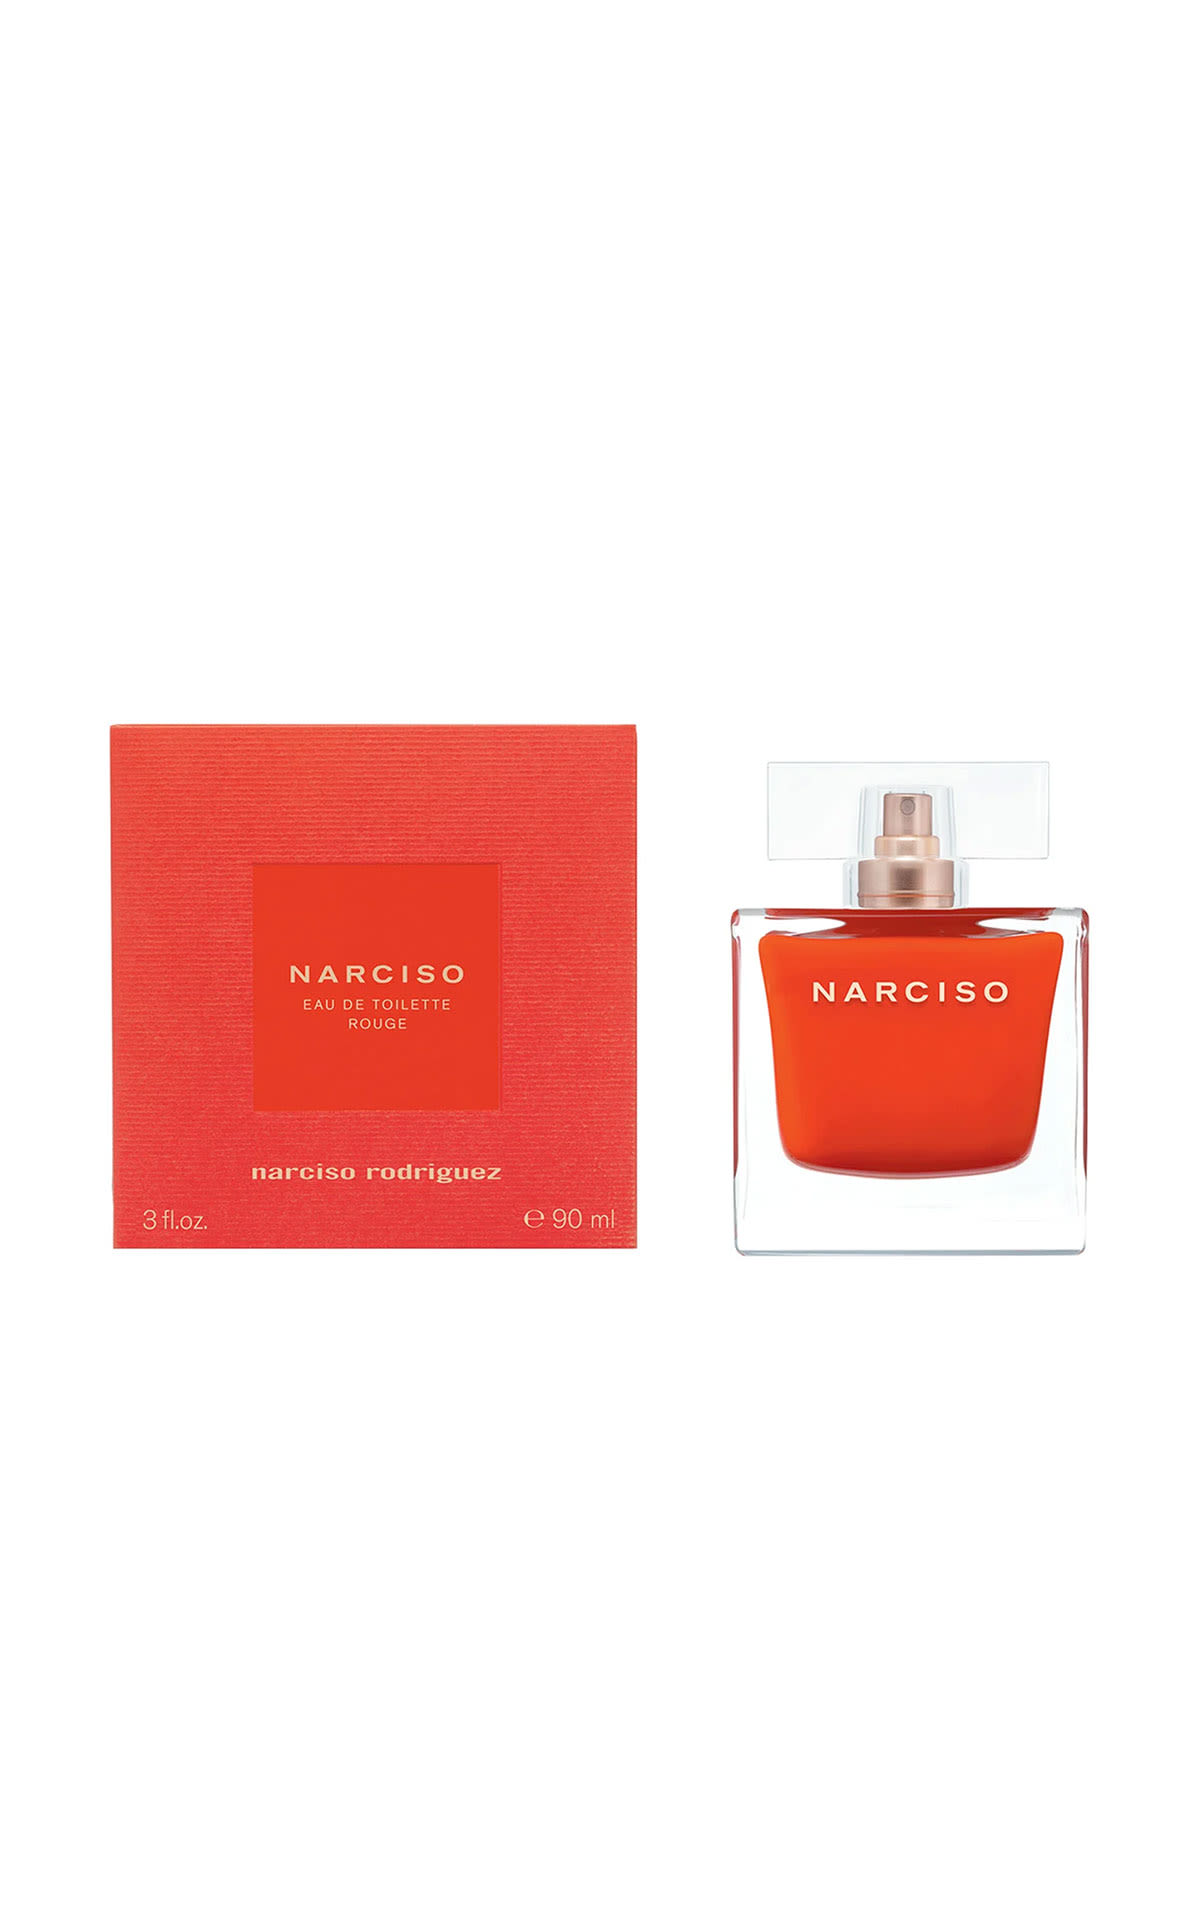 Beaute Prestige International Narciso Rodriguez Narciso rouge EDT 30ml from Bicester Village